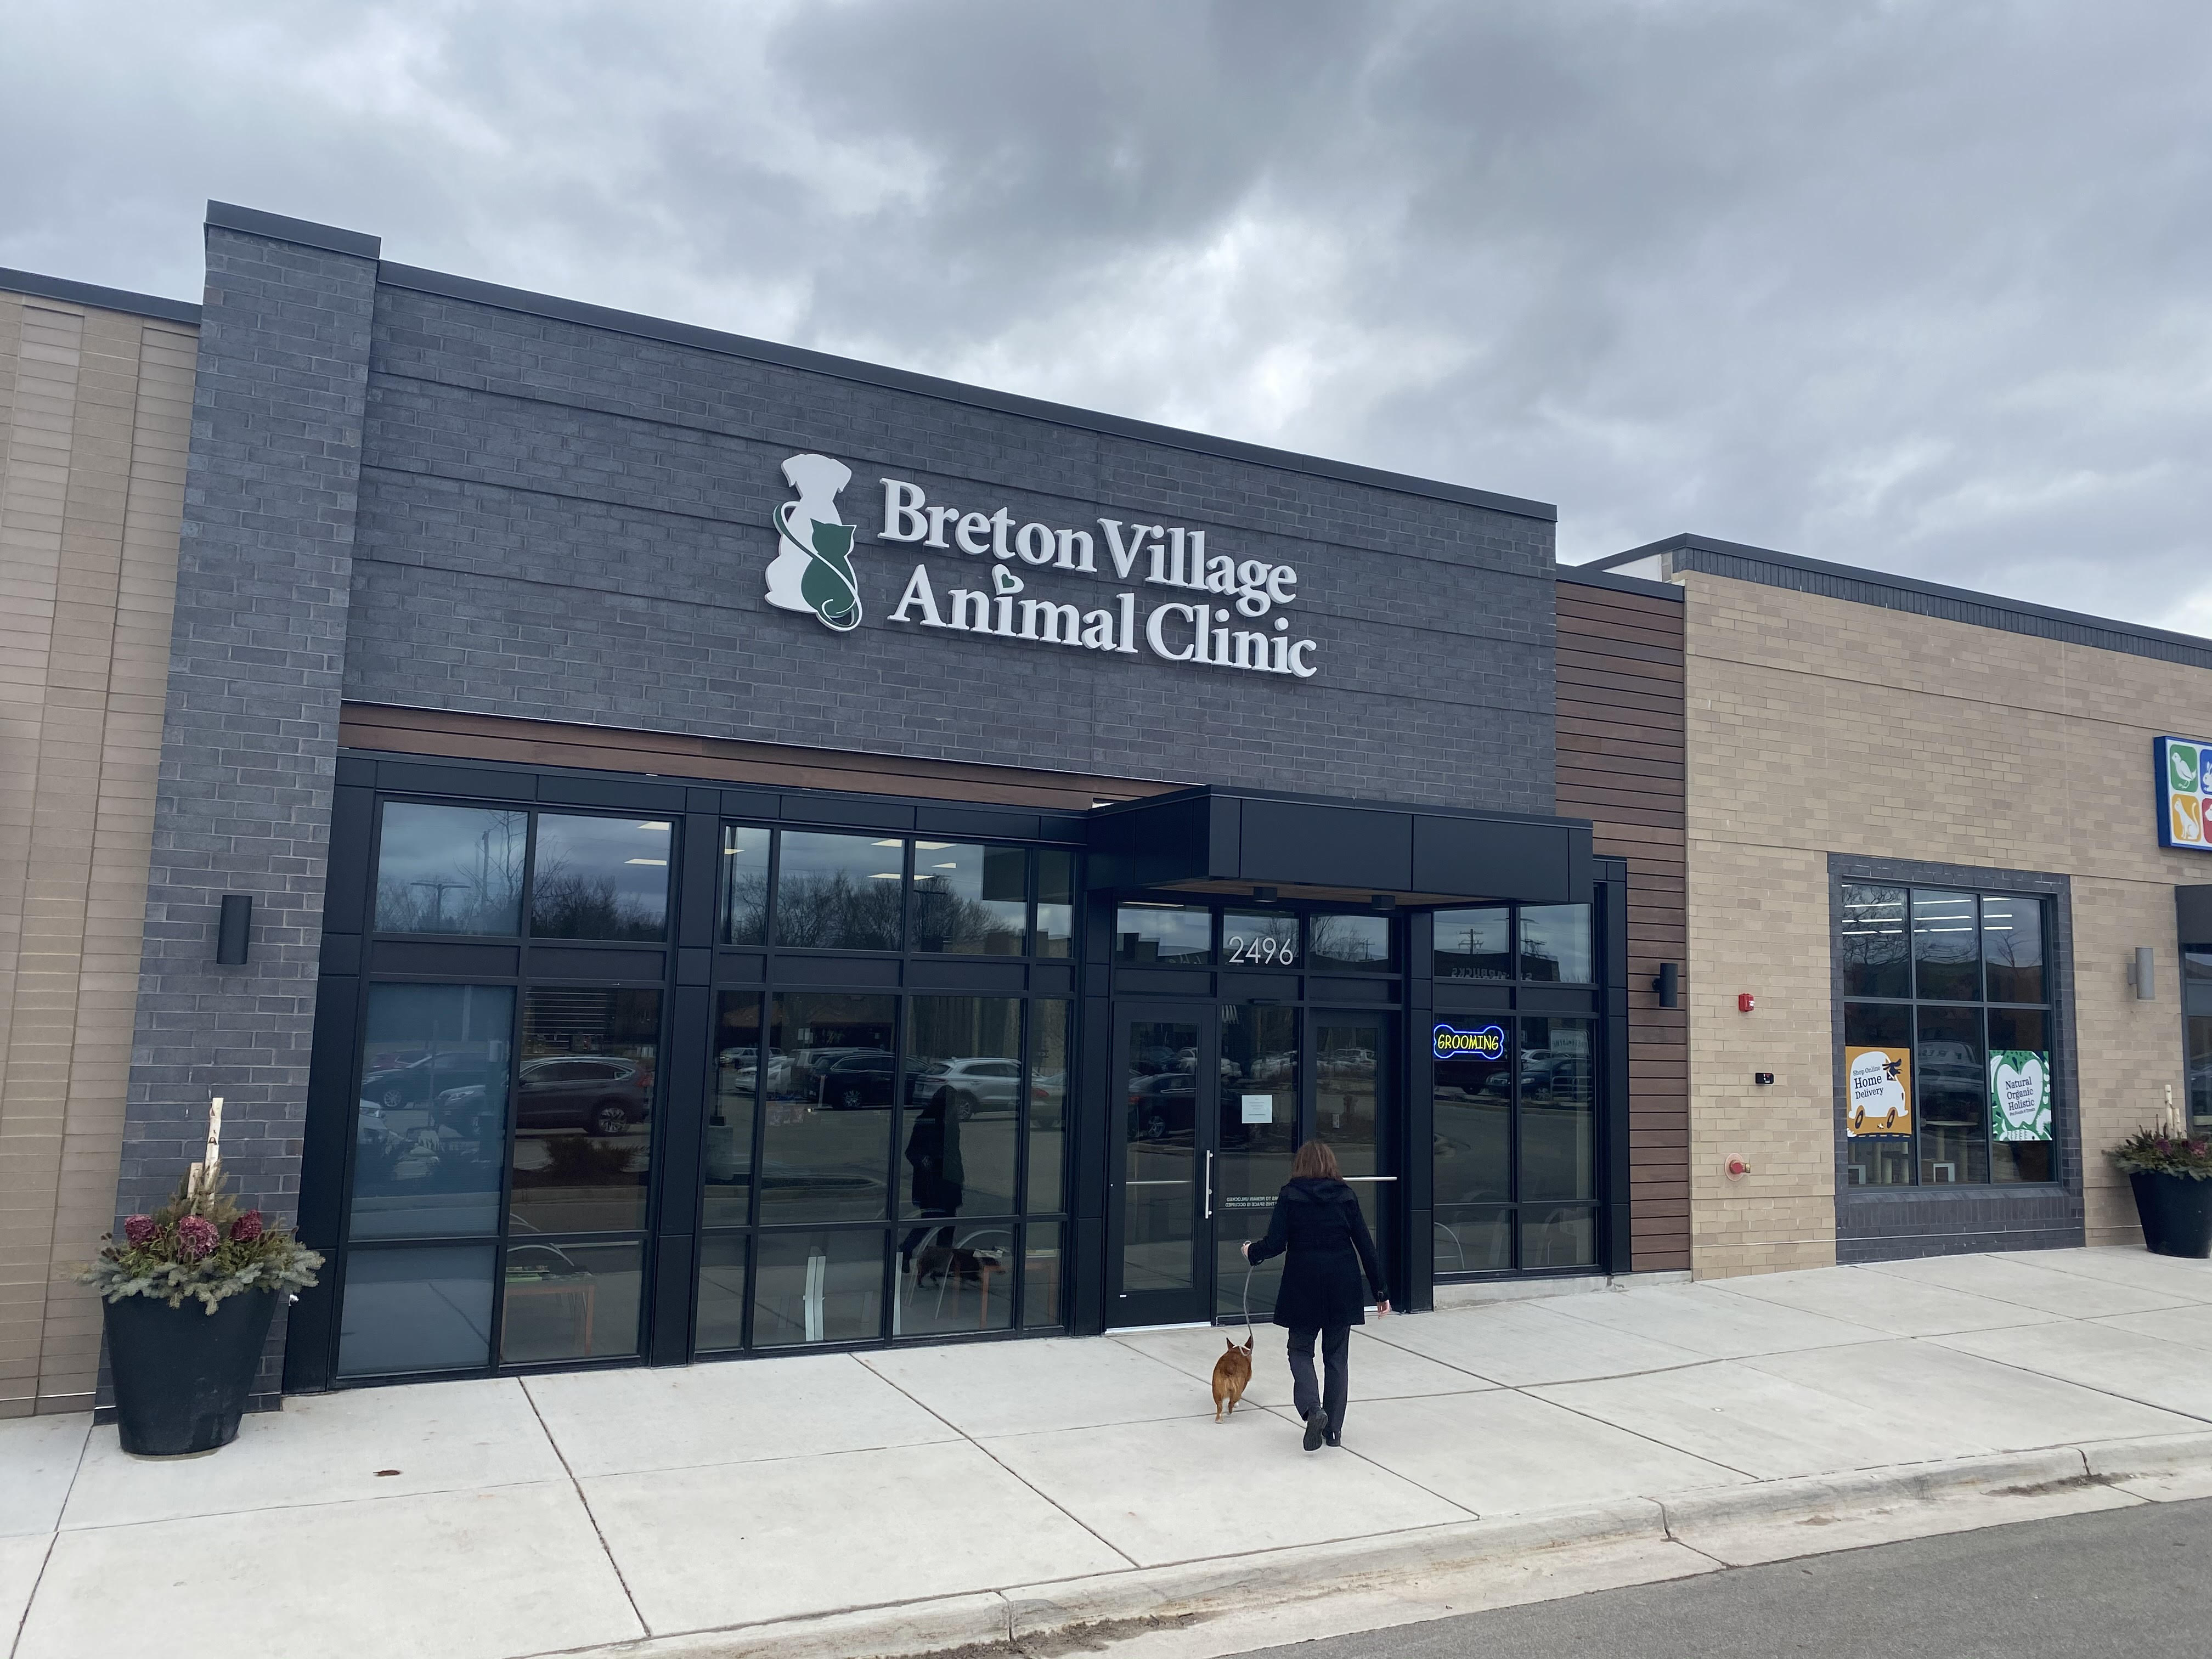 Breton Village Animal Clinic is ready to serve in a new location